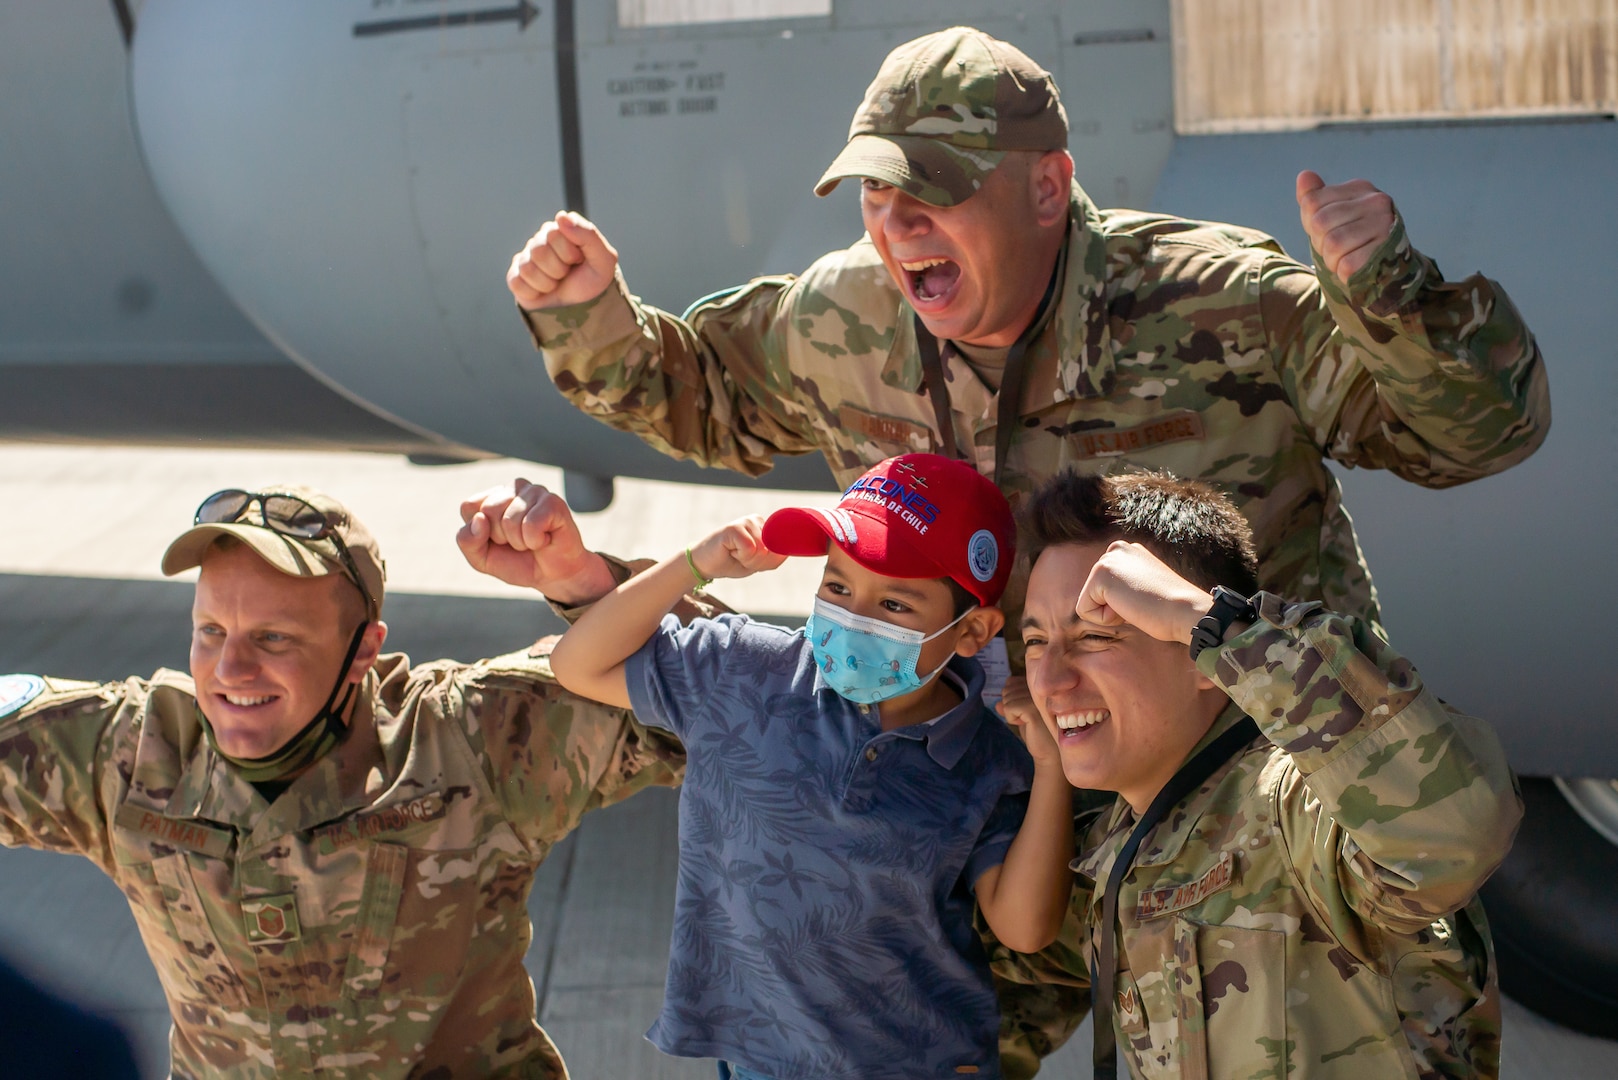 Texas Air National Guard Master Sgt. Jarrett Patman, left, Tech. Sgt. Kevin Hannah, middle, and Staff Sgt. Ivan Castañeda, right, take photos with the public by the C-130J Super Hercules static display at the Feria Internacional del Aire y Espacio (FIDAE) April 9, 2022, in Santiago, Chile. Airmen from the 136th Airlift Wing were available to shepherd tours and answer questions throughout the week of the airshow in an effort to strengthen international partnerships.